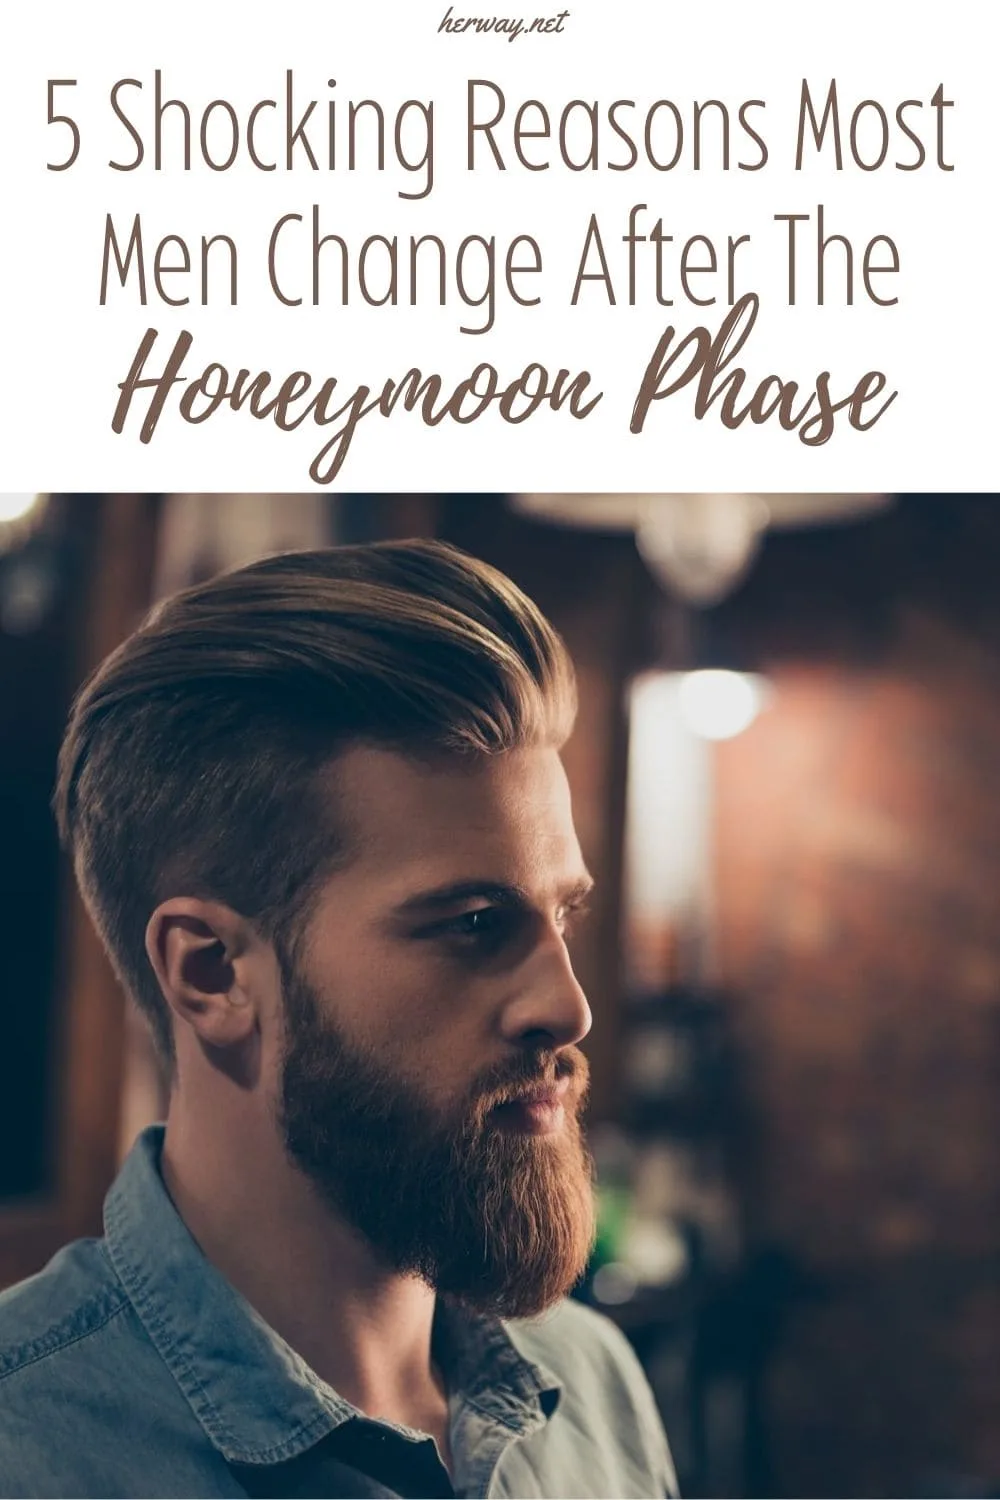 5 Shocking Reasons Most Men Change After The Honeymoon Phase